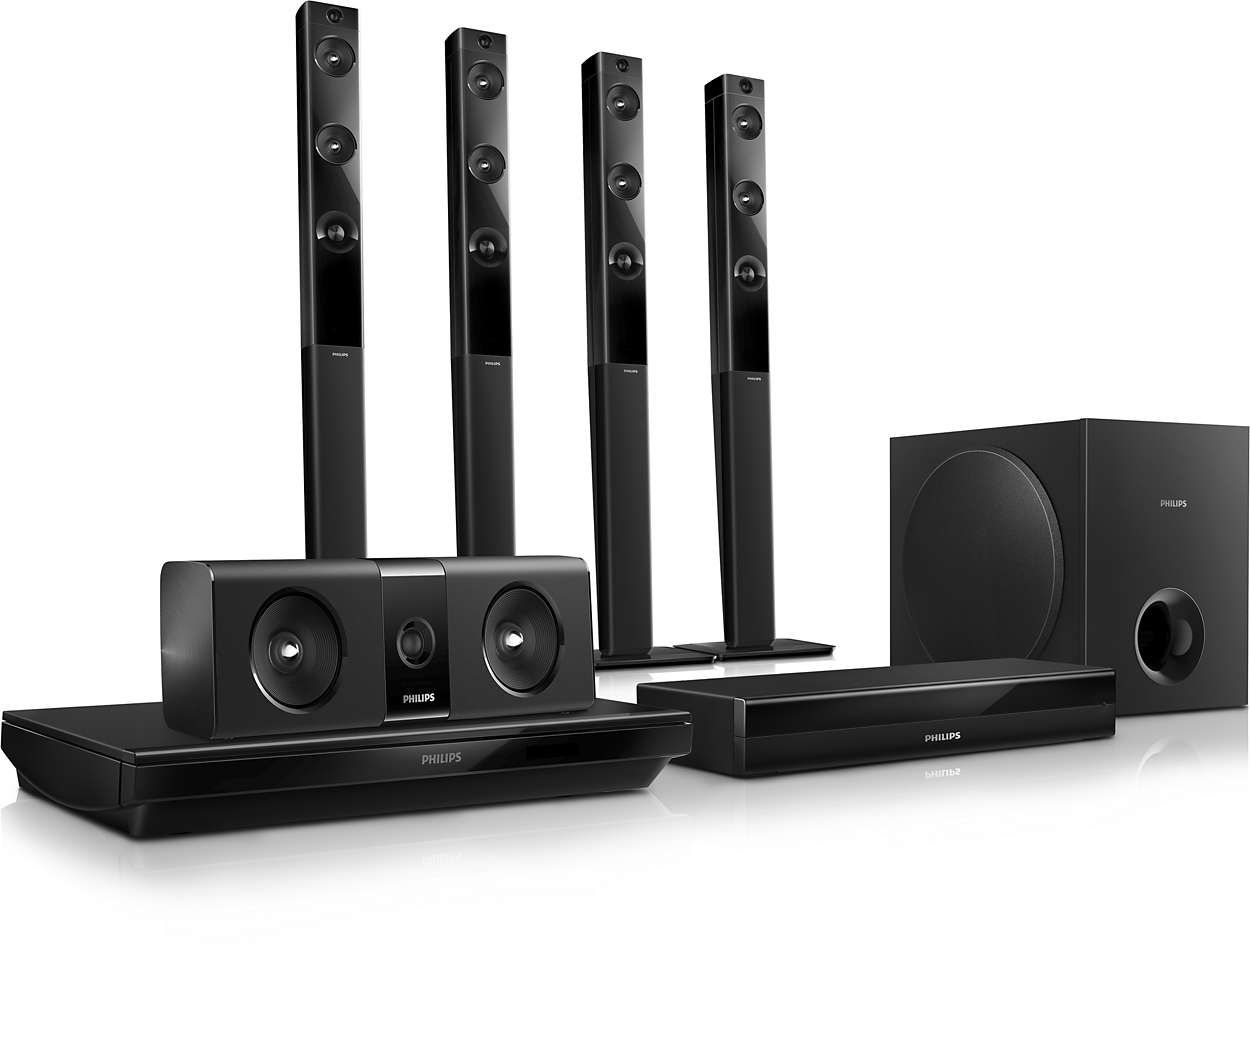 Image result for Philips HTB5580/94 5.1 Channel 1000W Blu-ray Home Theater System